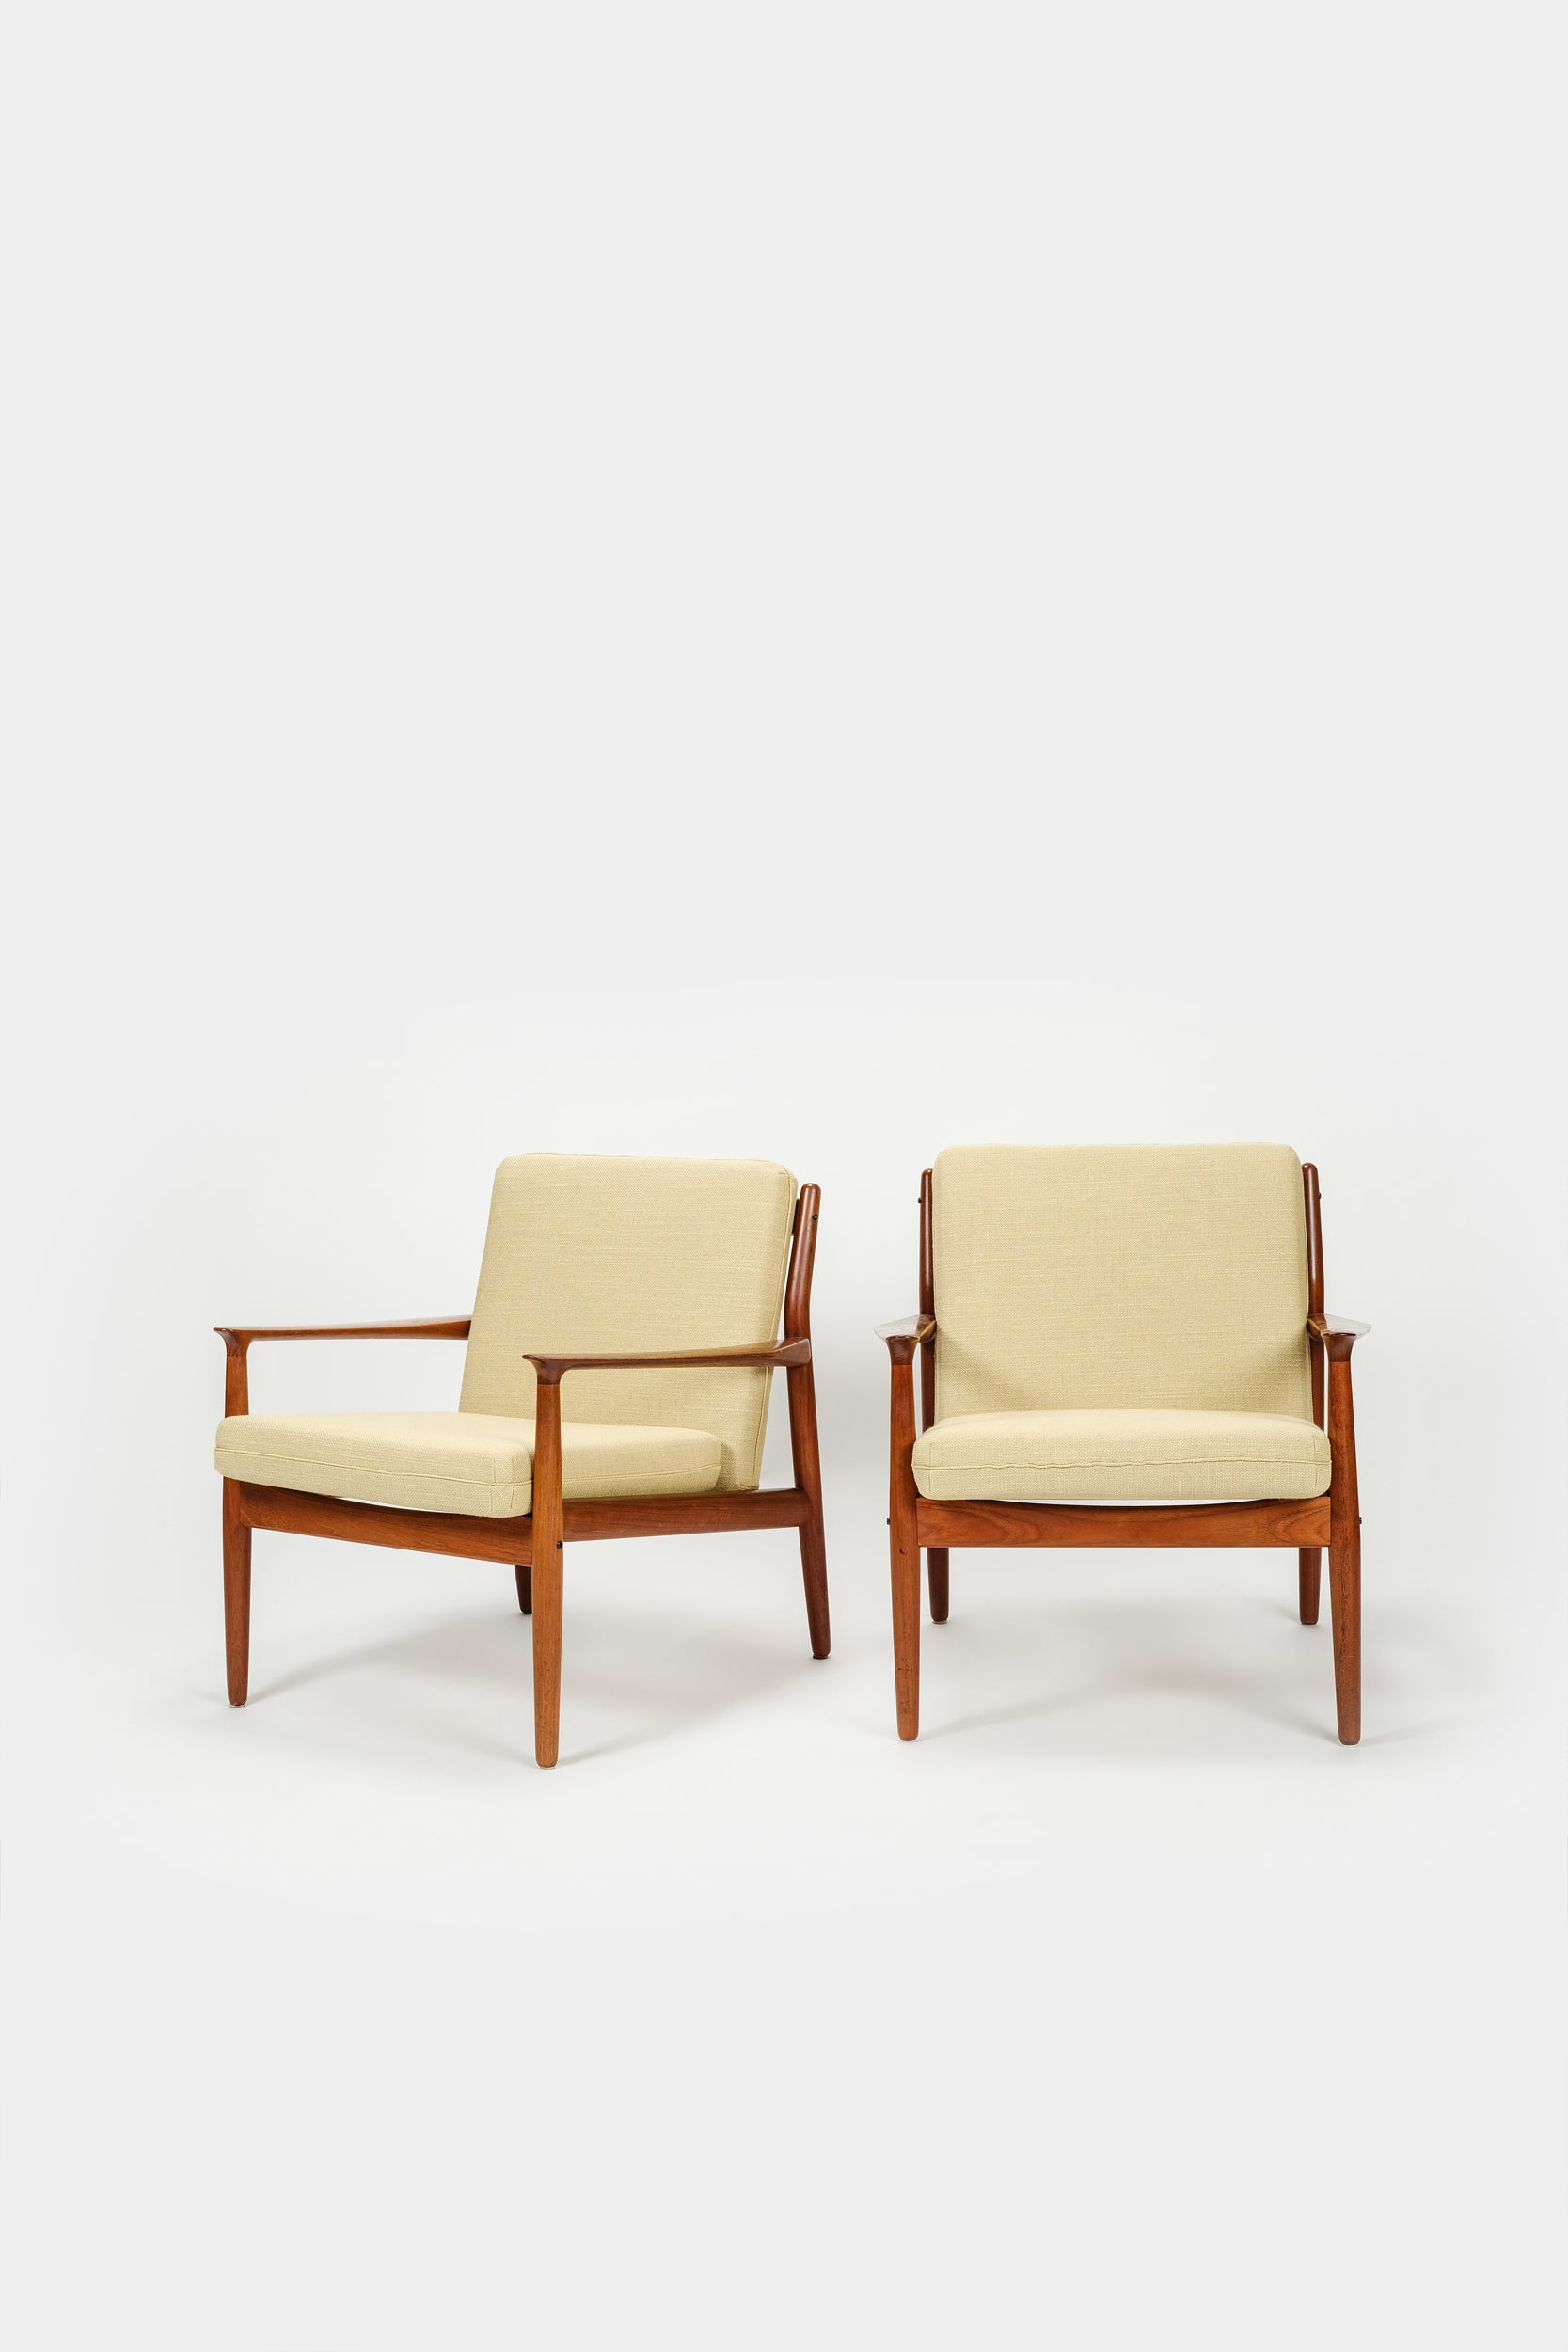 Two beautiful teak armchairs from the 50s, Denmark, designed by Svend Aage Eriksen for the company Glostrup Møbelfabrik. The frame of the armchairs is made of solid teak, the cushions are freshly upholstered with grey flannel fabric framed with leather piping. With additional cushions with light yellow cotton fabric. A total of 8 cushions. Very nice condition.  Dimensions Width: 67 cm | Length: 72 cm | Height: 75 cm  Seat height: 38 cm